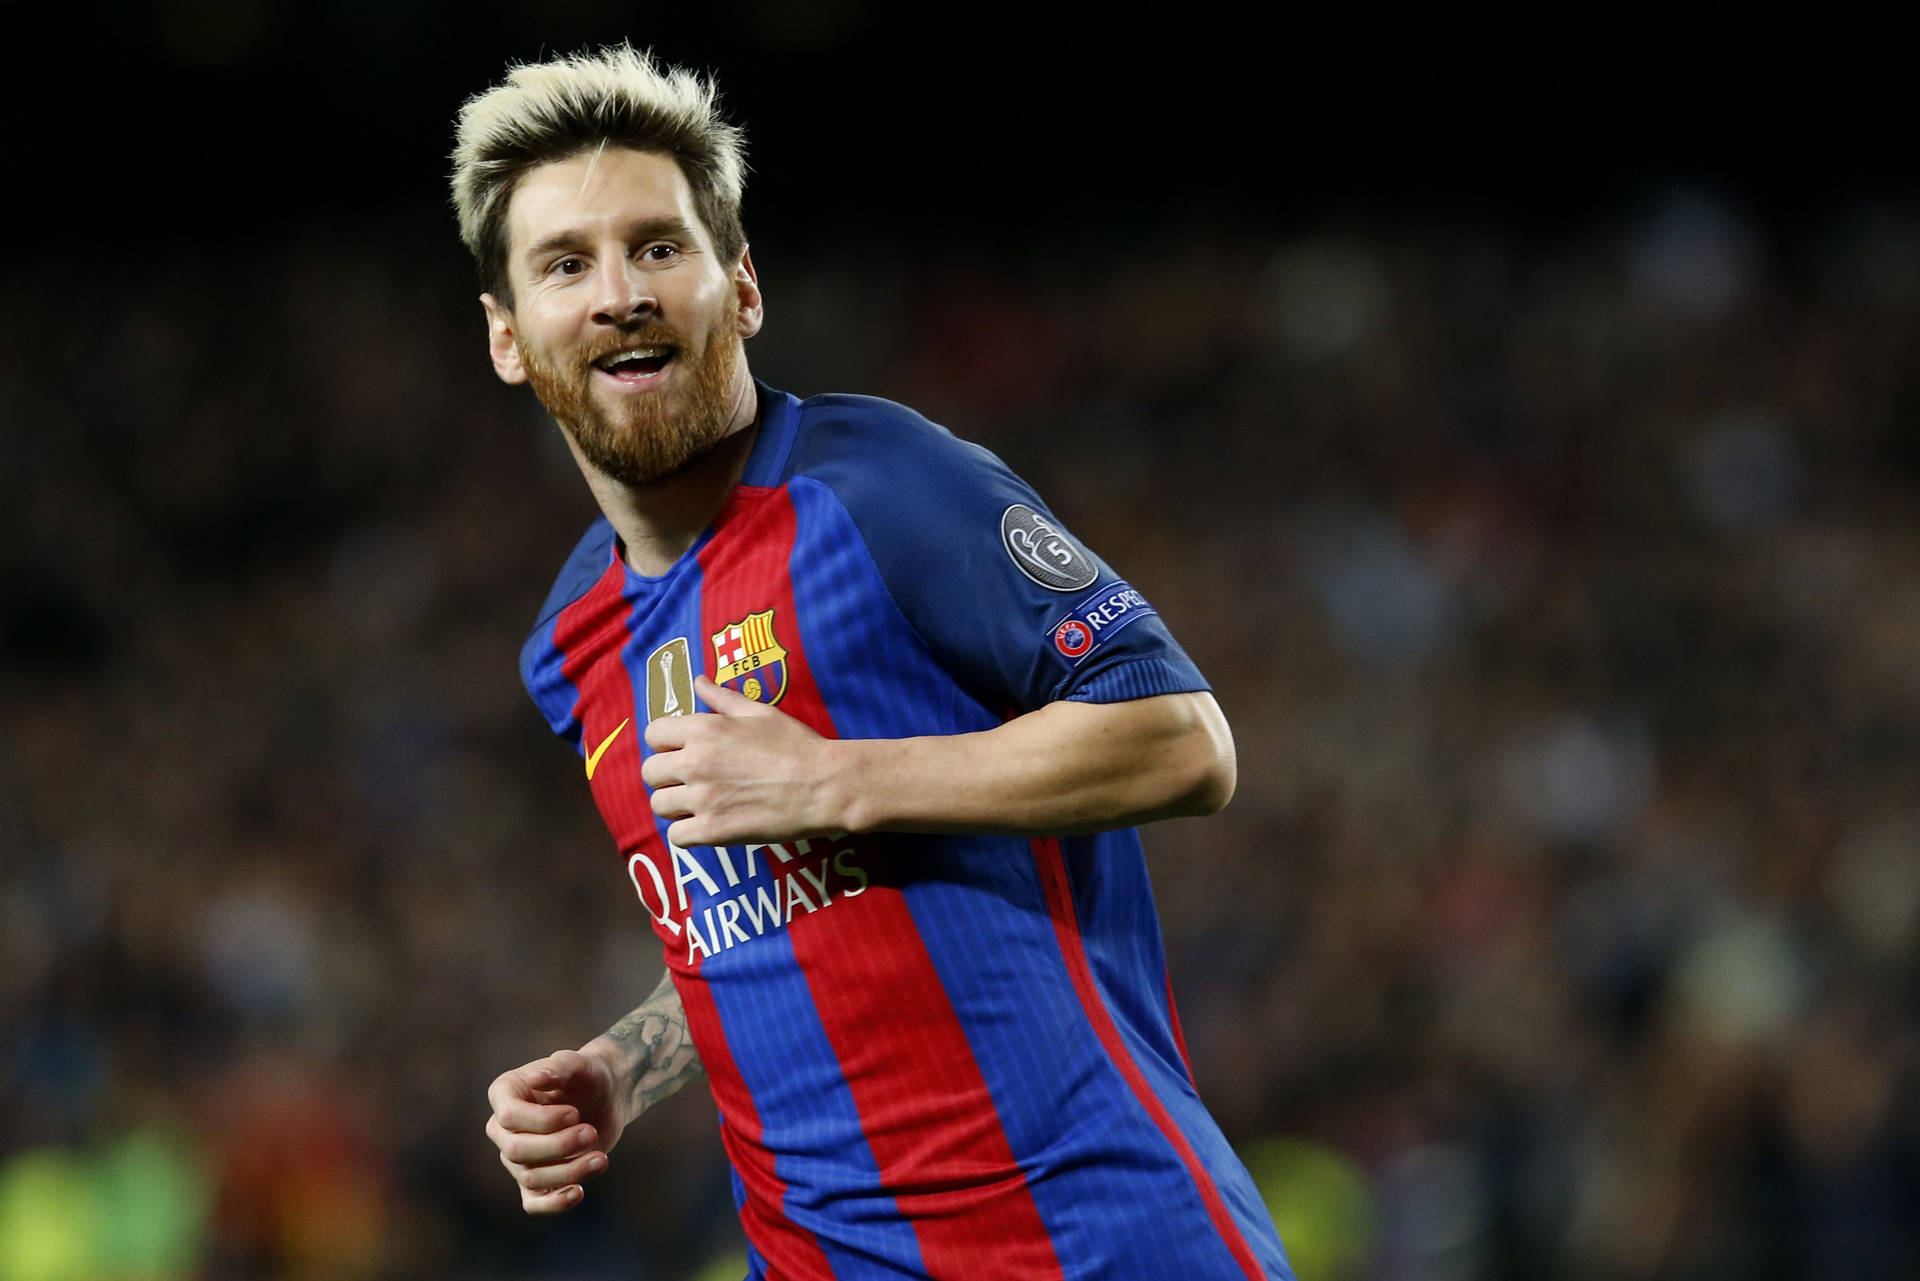 Lionel Messi's New Bleached Blonde Hair Sparks Controversy - wide 3